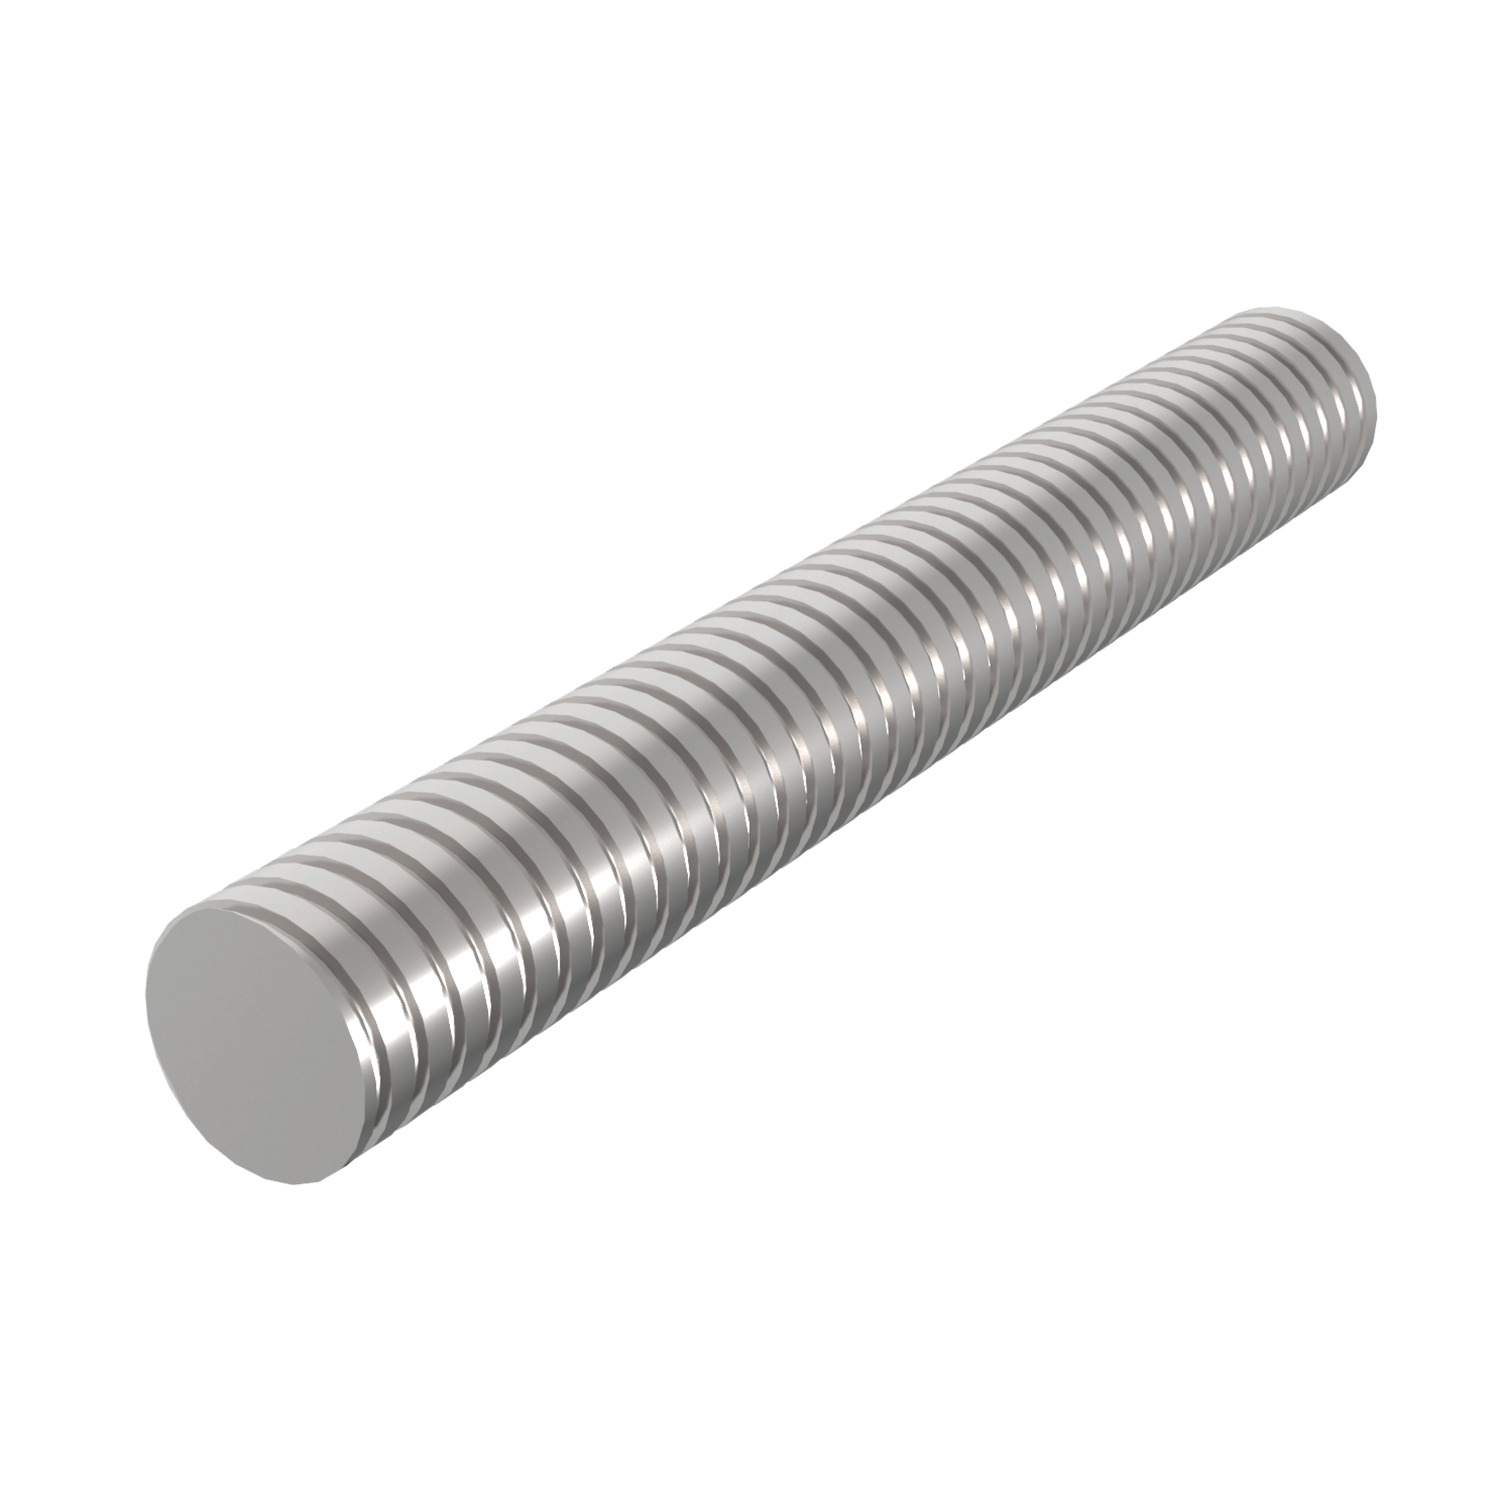 Product L1323, Stainless Lead Screws left hand thread / 